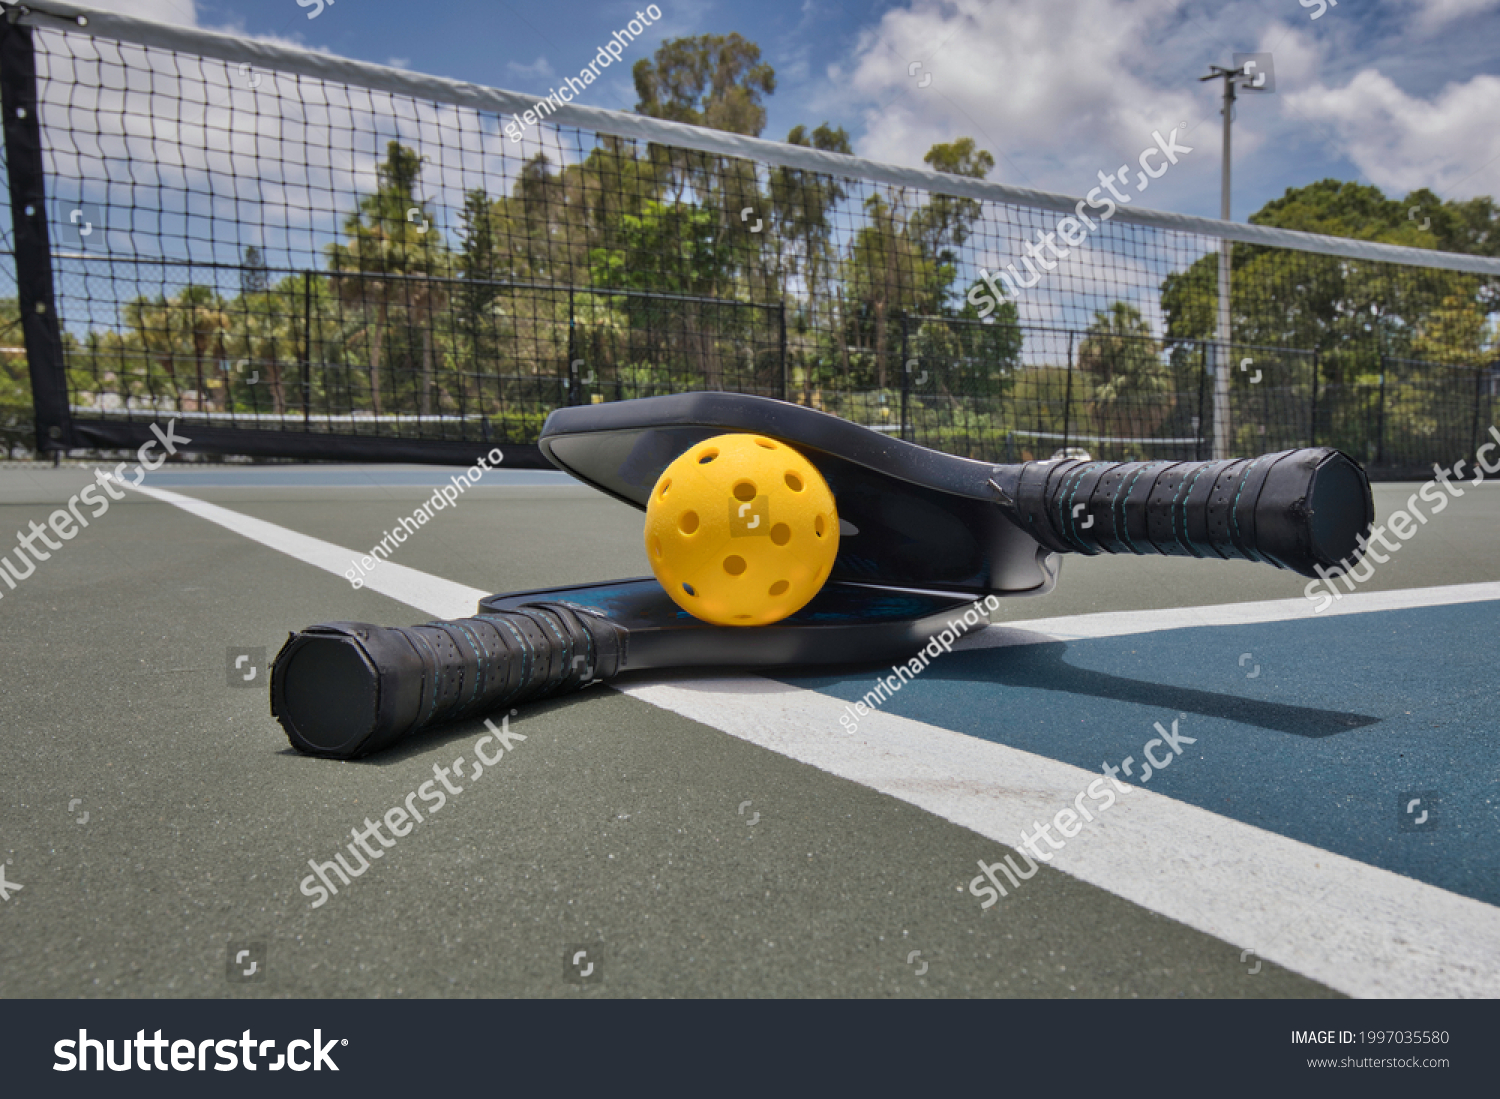 Closeup of a pickleball and paddles on an empty court under sunny skies. #1997035580